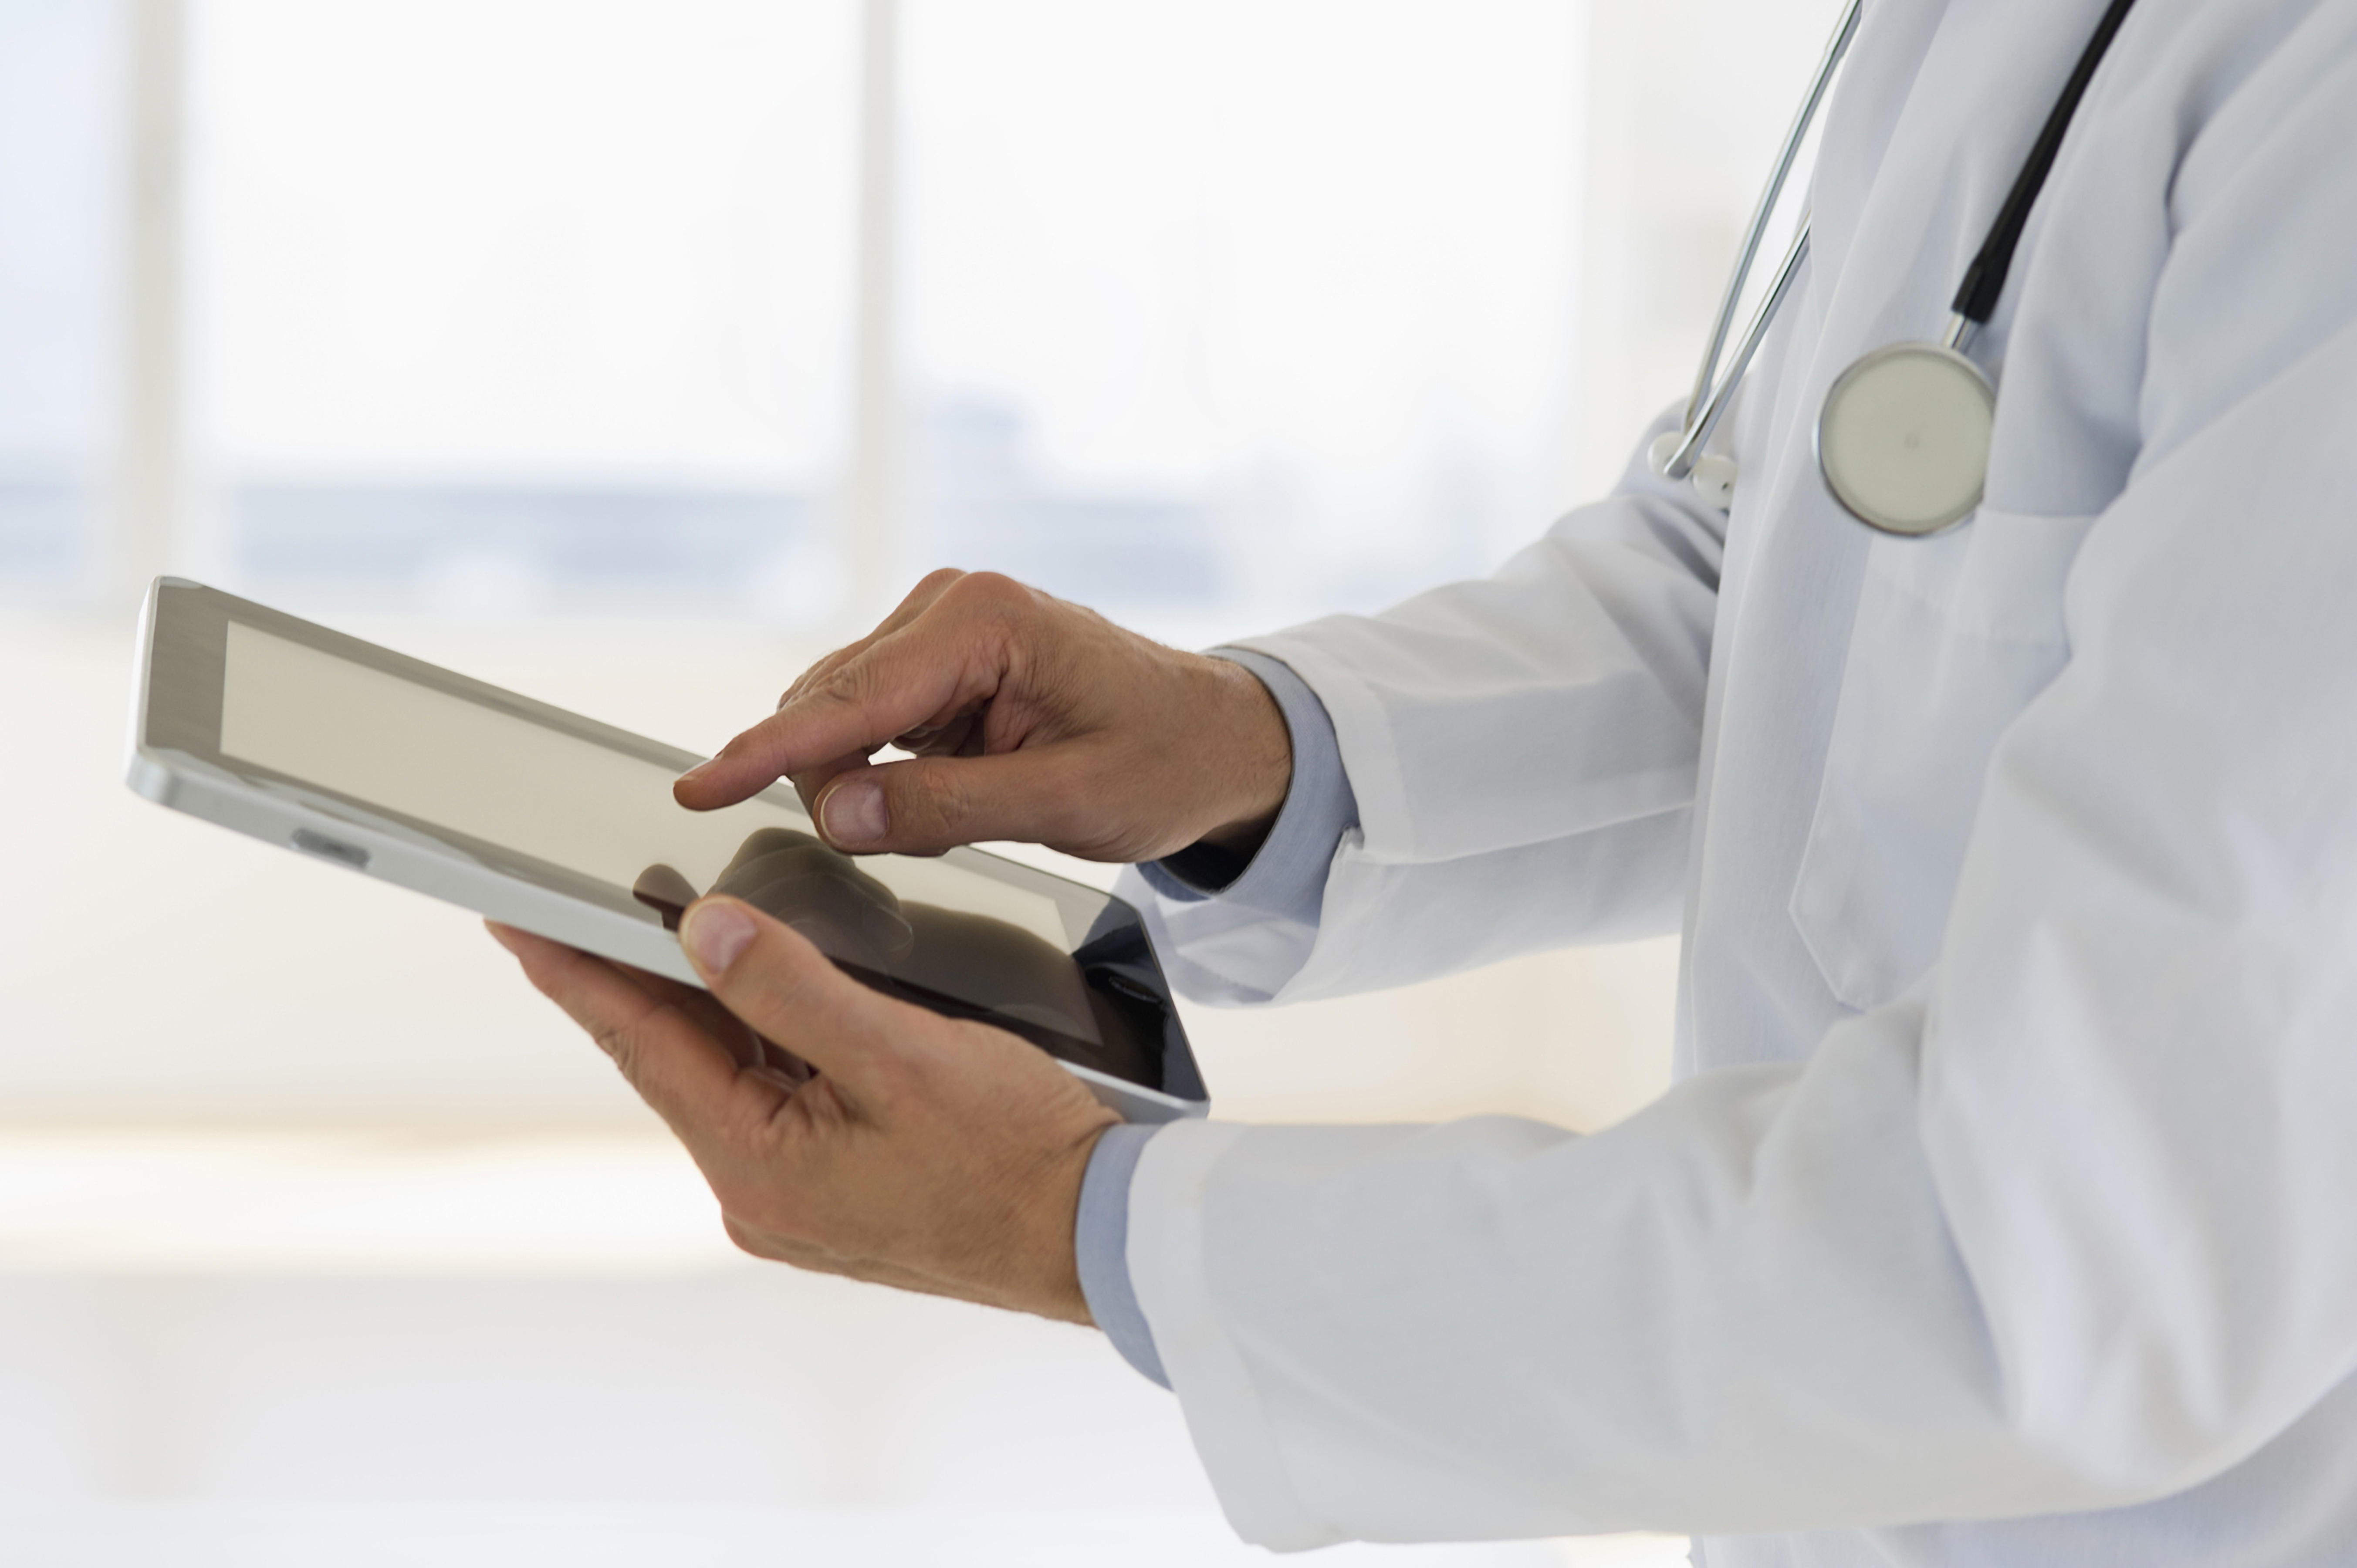 doctor accessing electronic health record